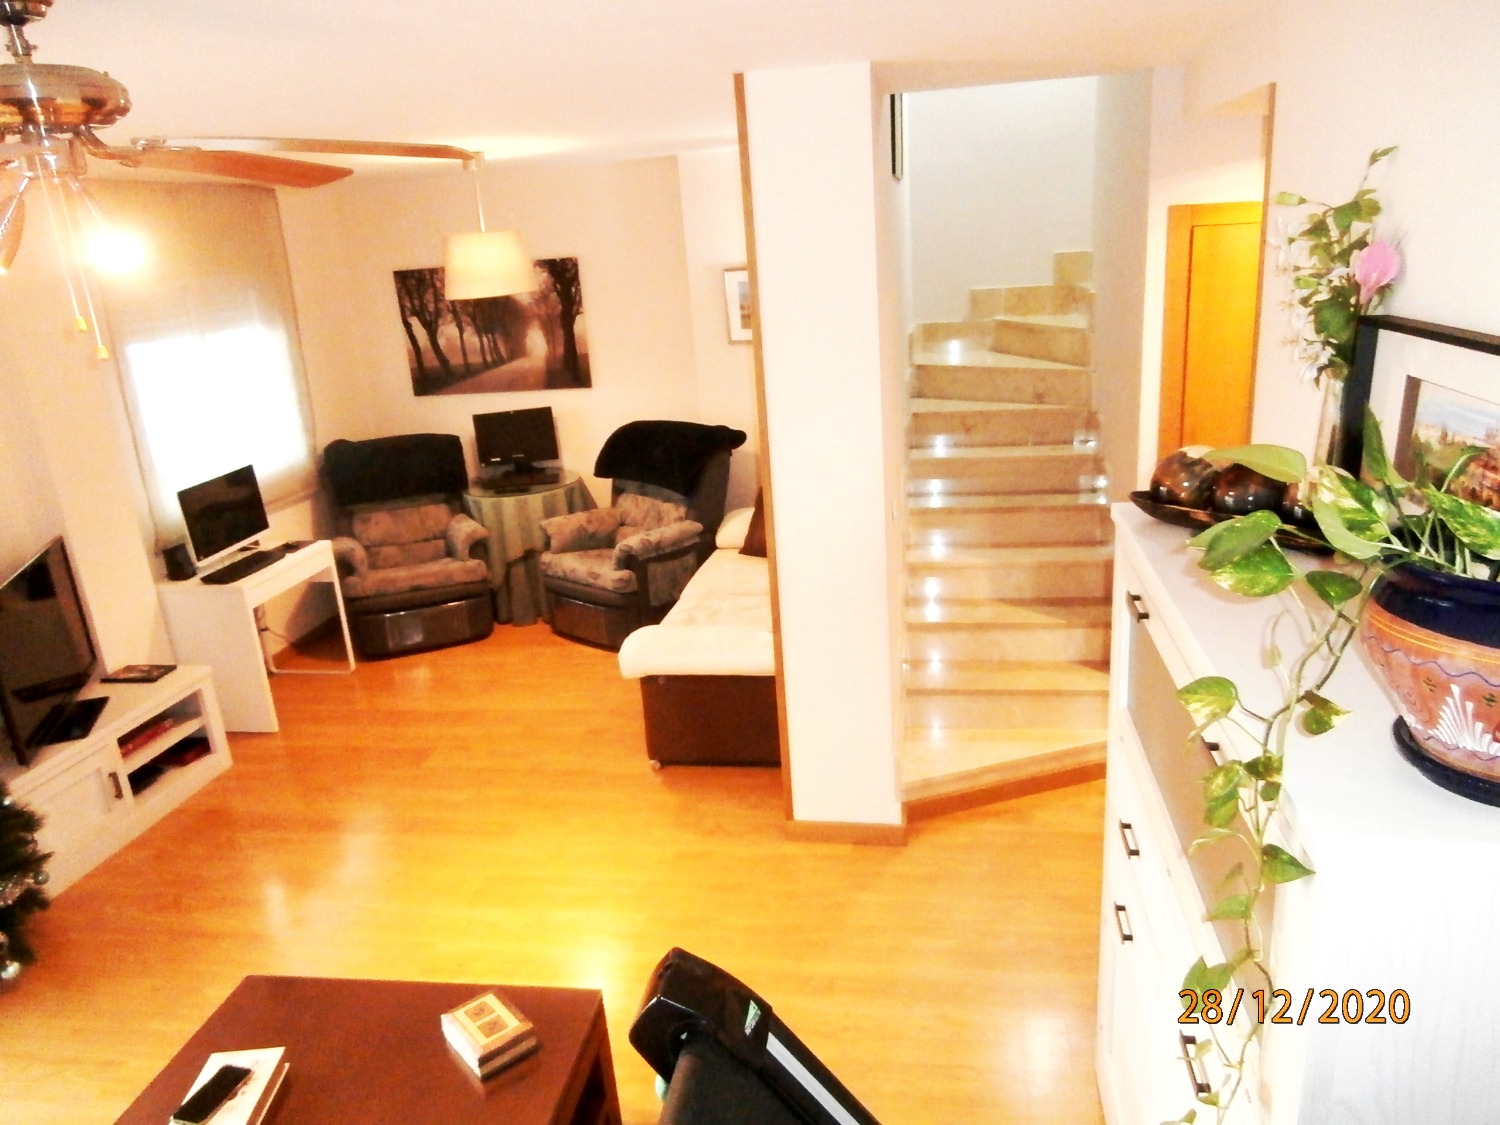 IMPECCABLE PENTHOUSE AT A REDUCED AND NEGOTIABLE PRICE, Excellent duplex penthouse, renovated.